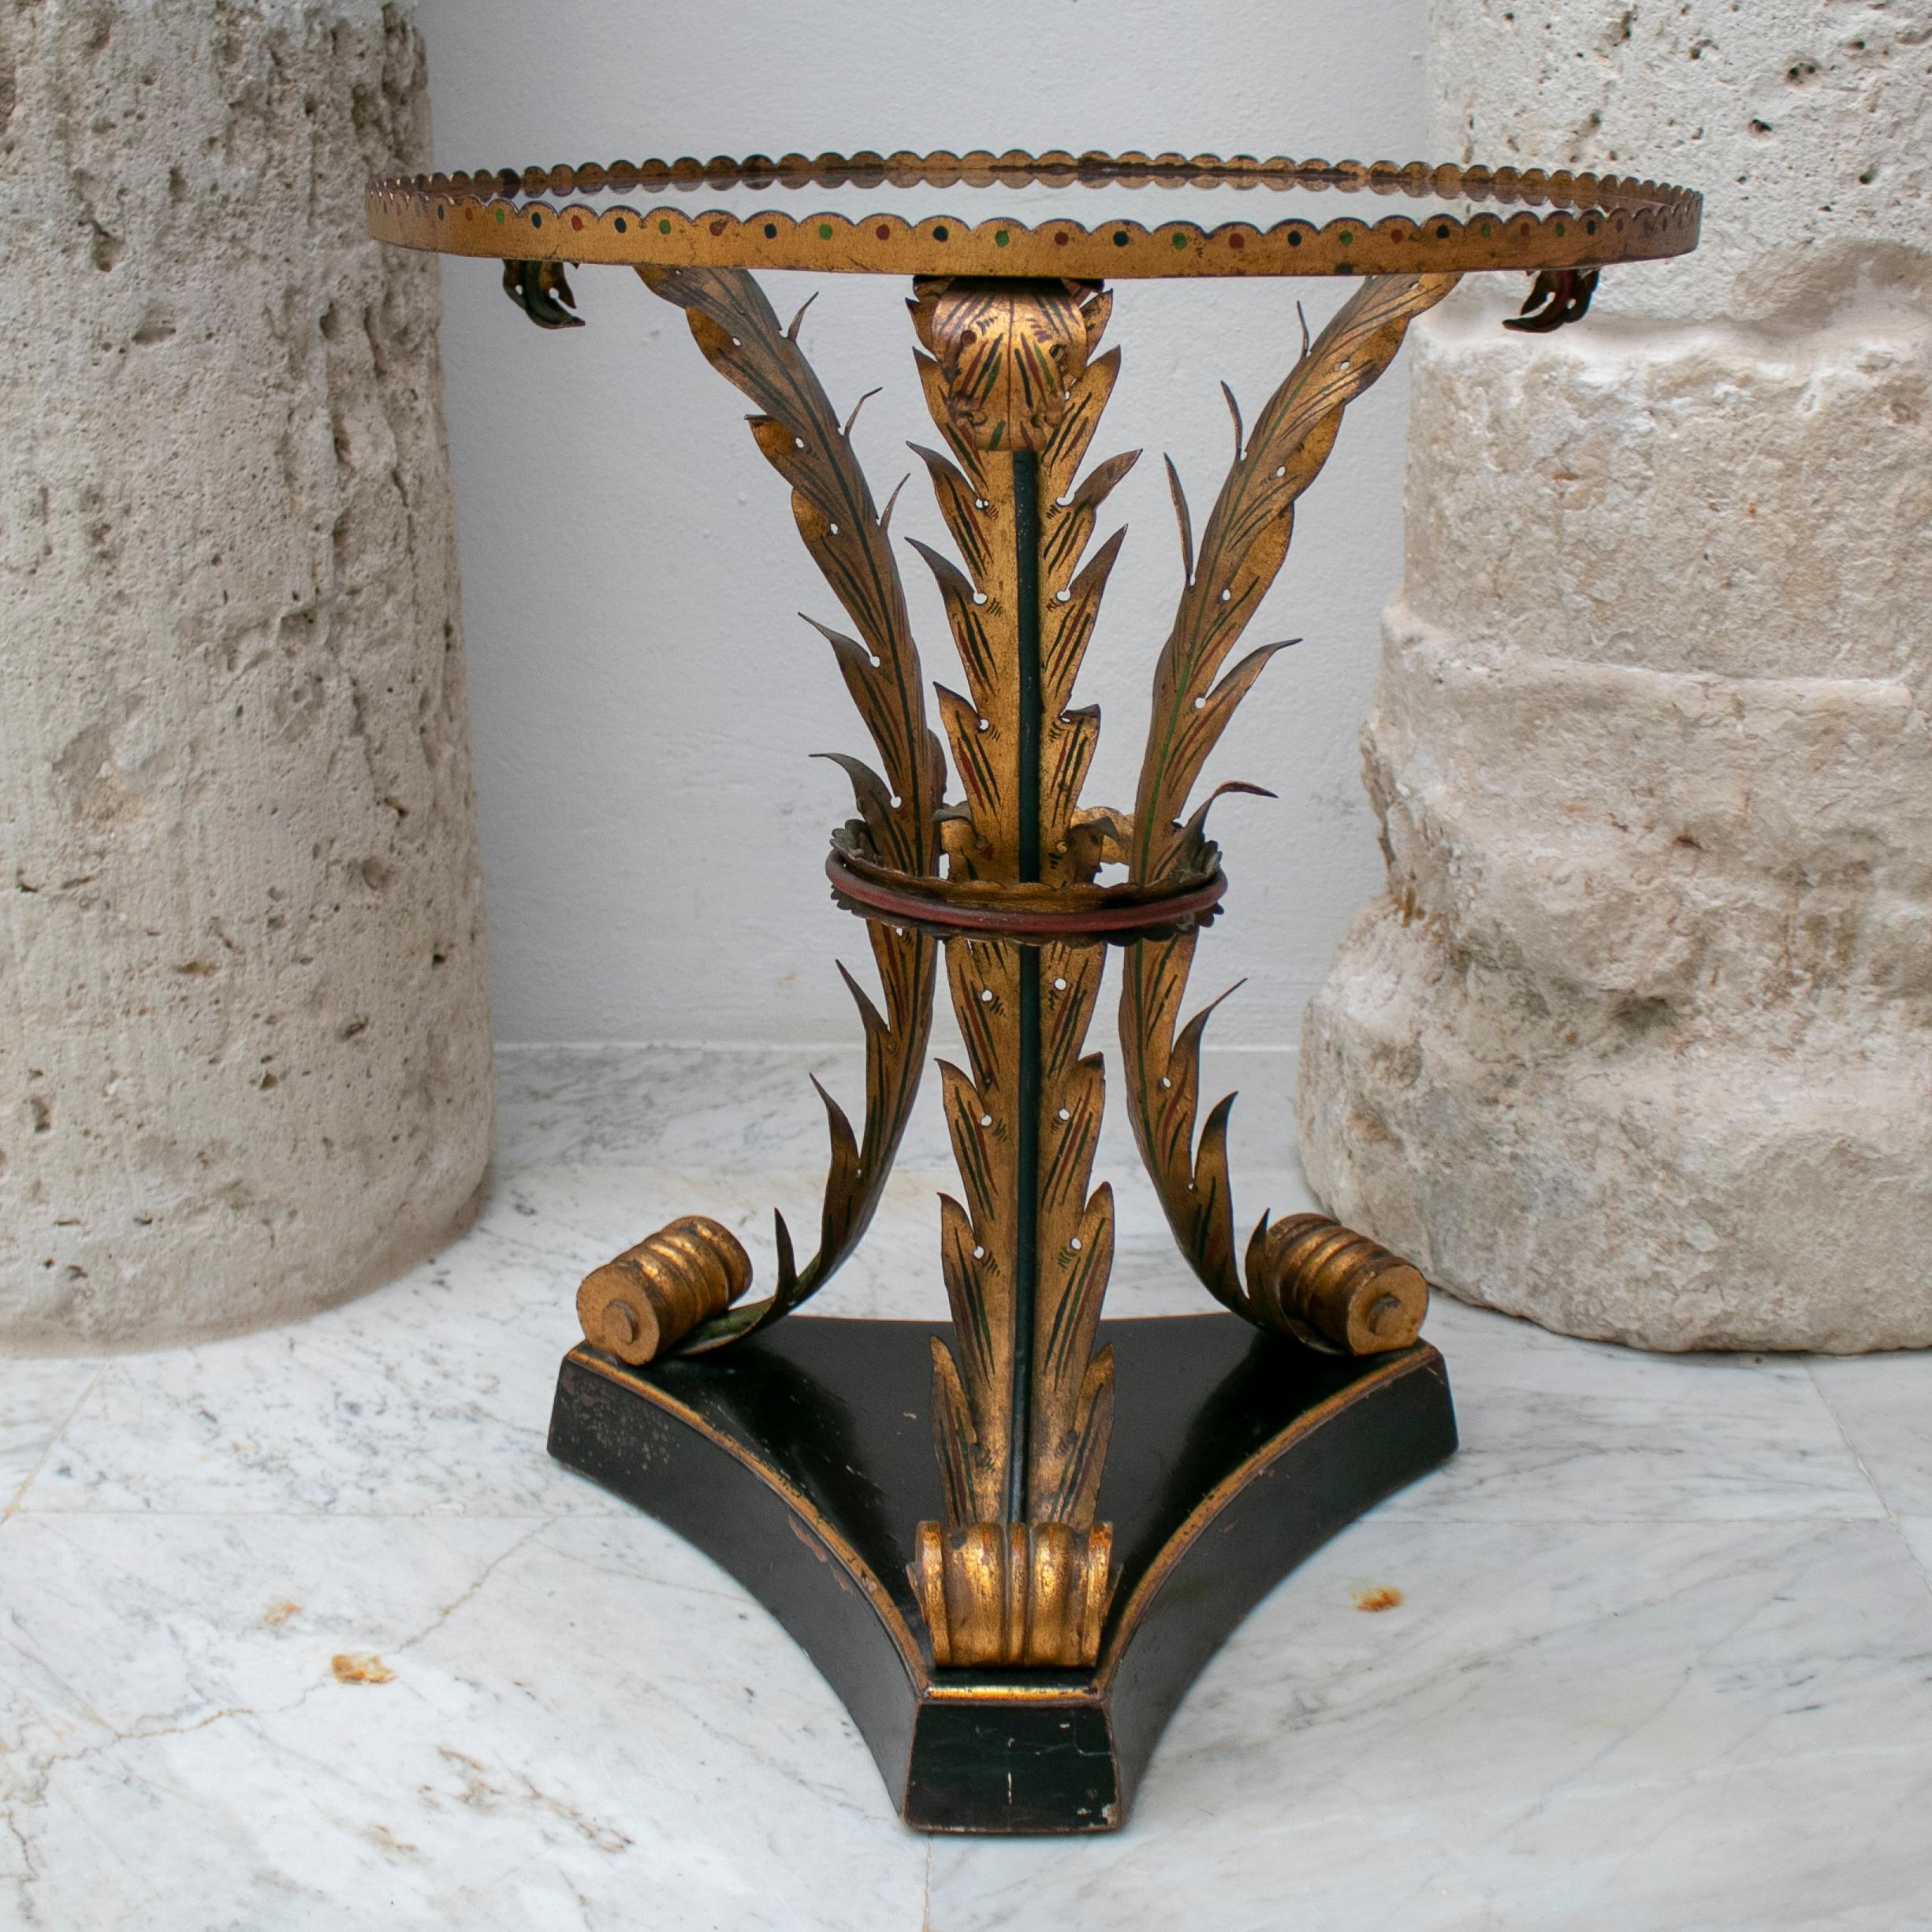 18th century French bronze and painted glass top table with oriental influence.